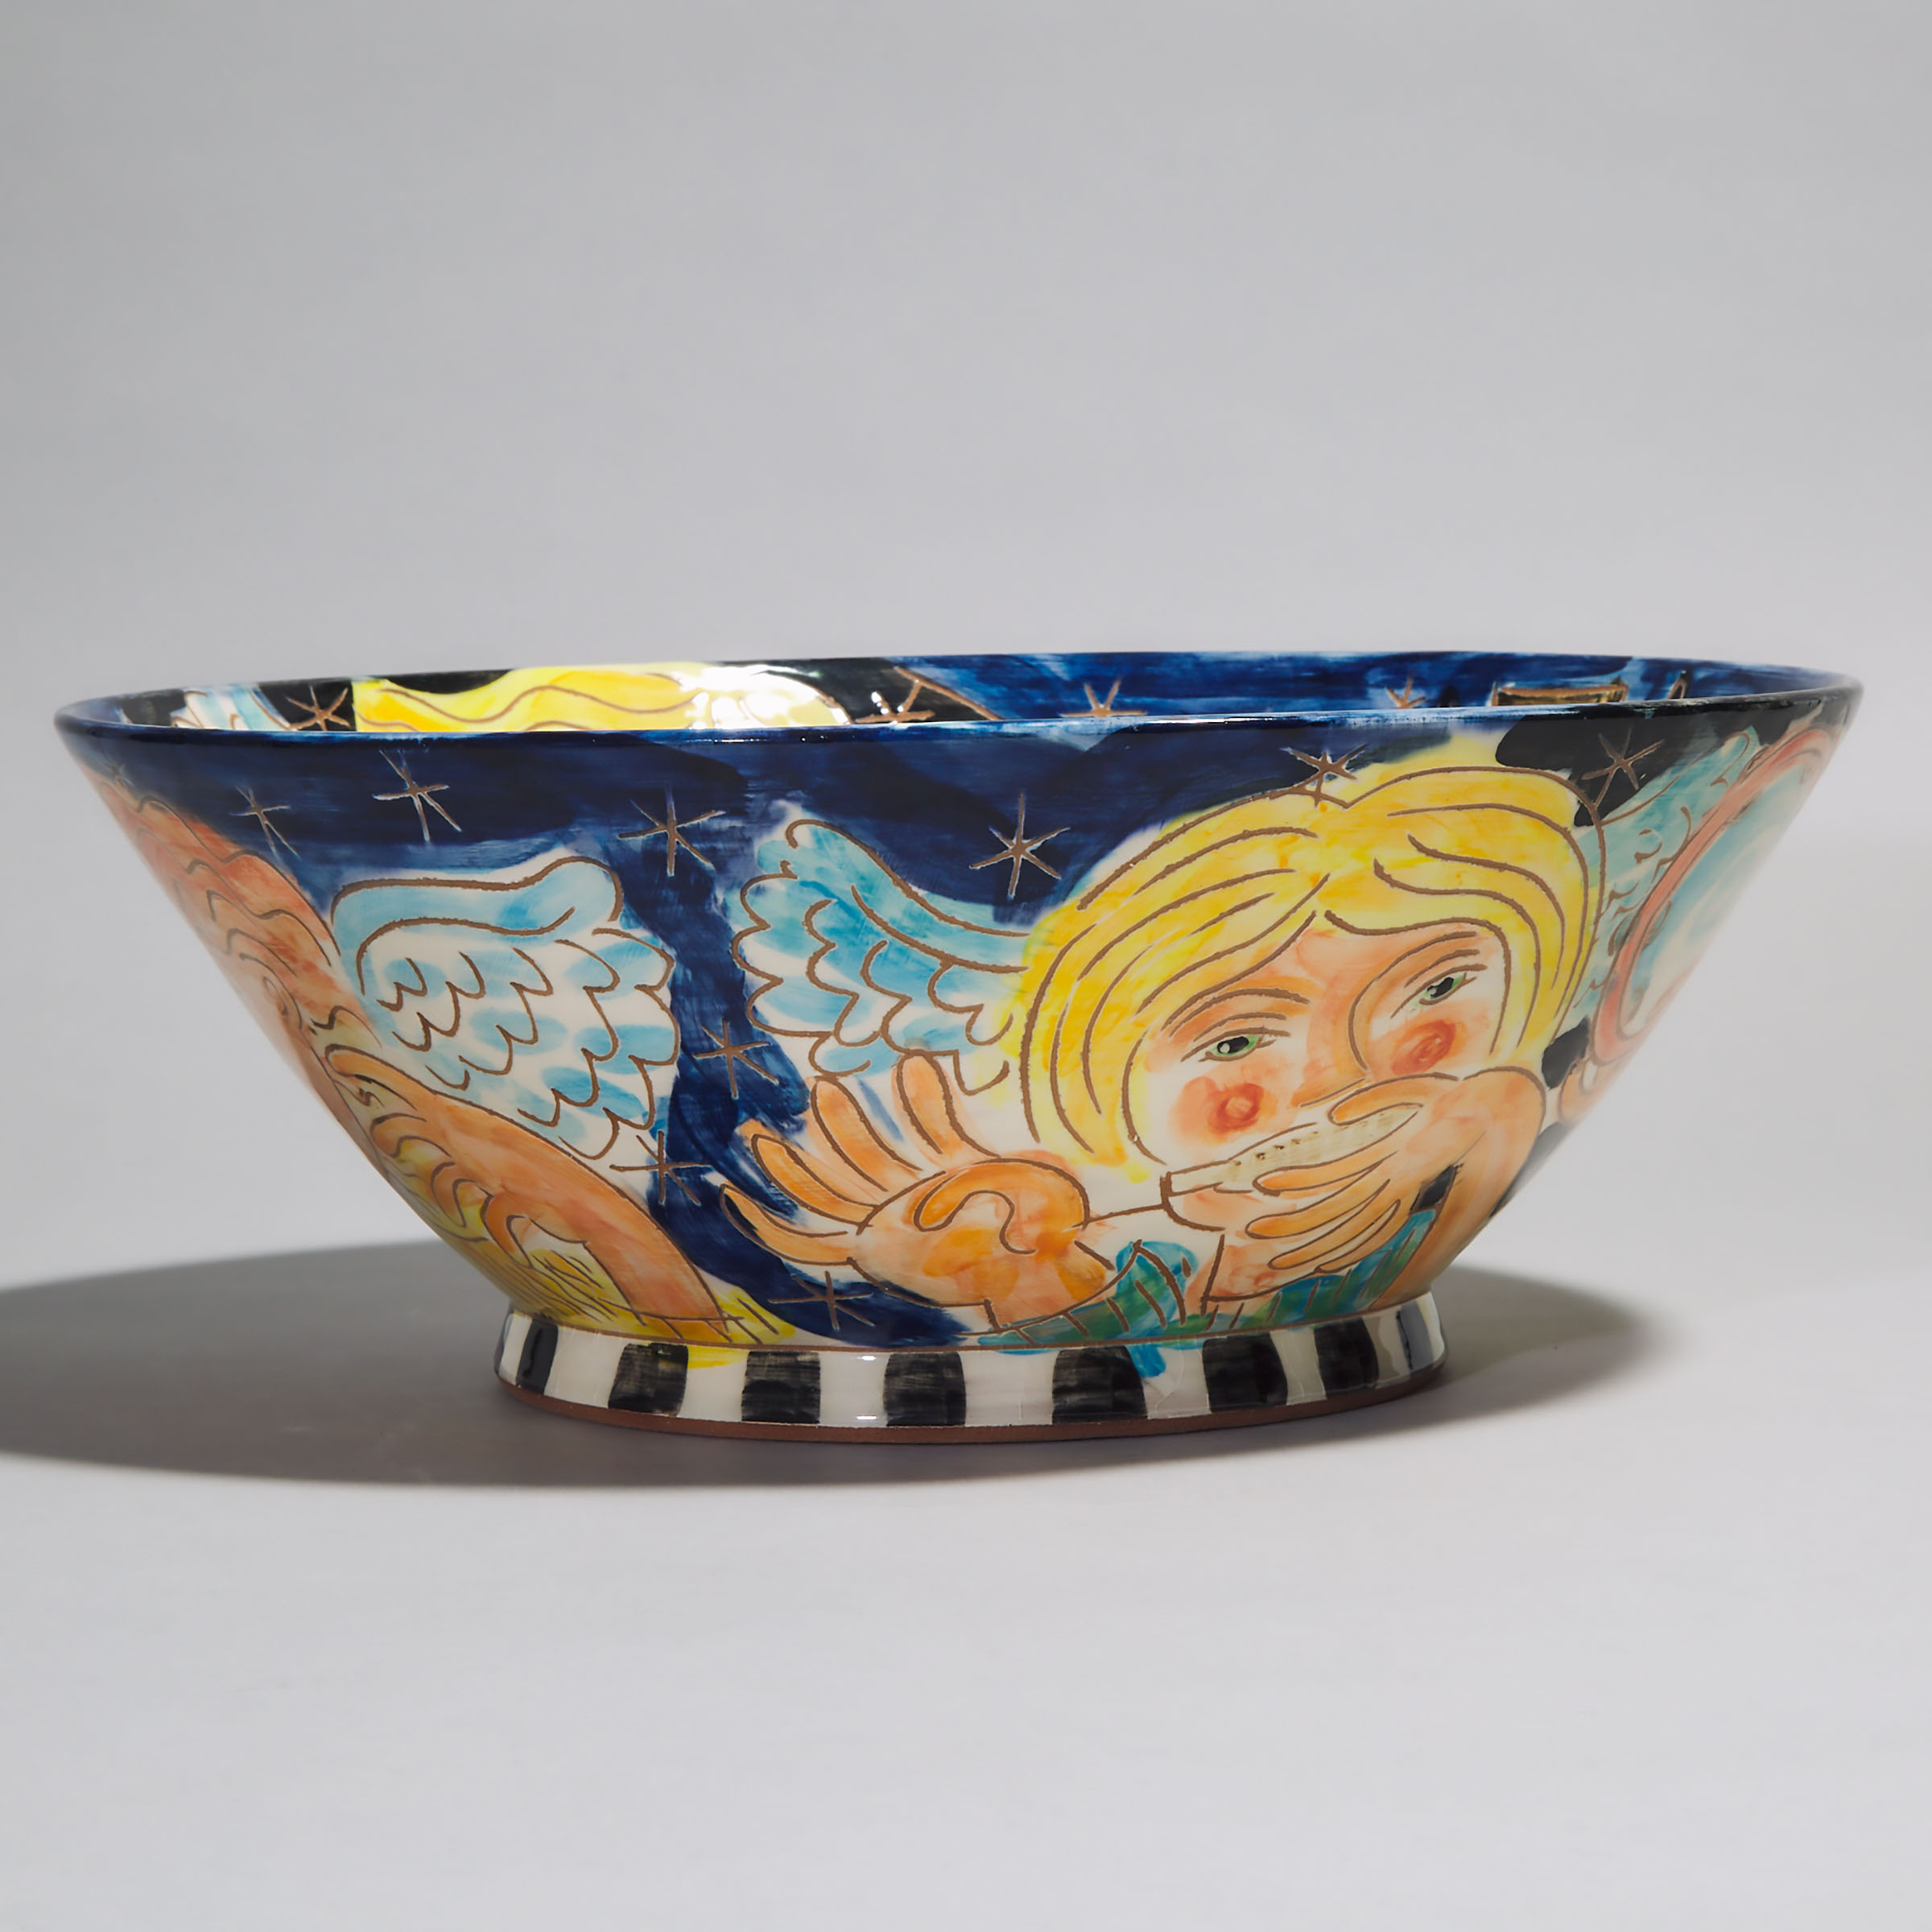 Mike Levy (British), Large Sgraffito Decorated Bowl, 1991